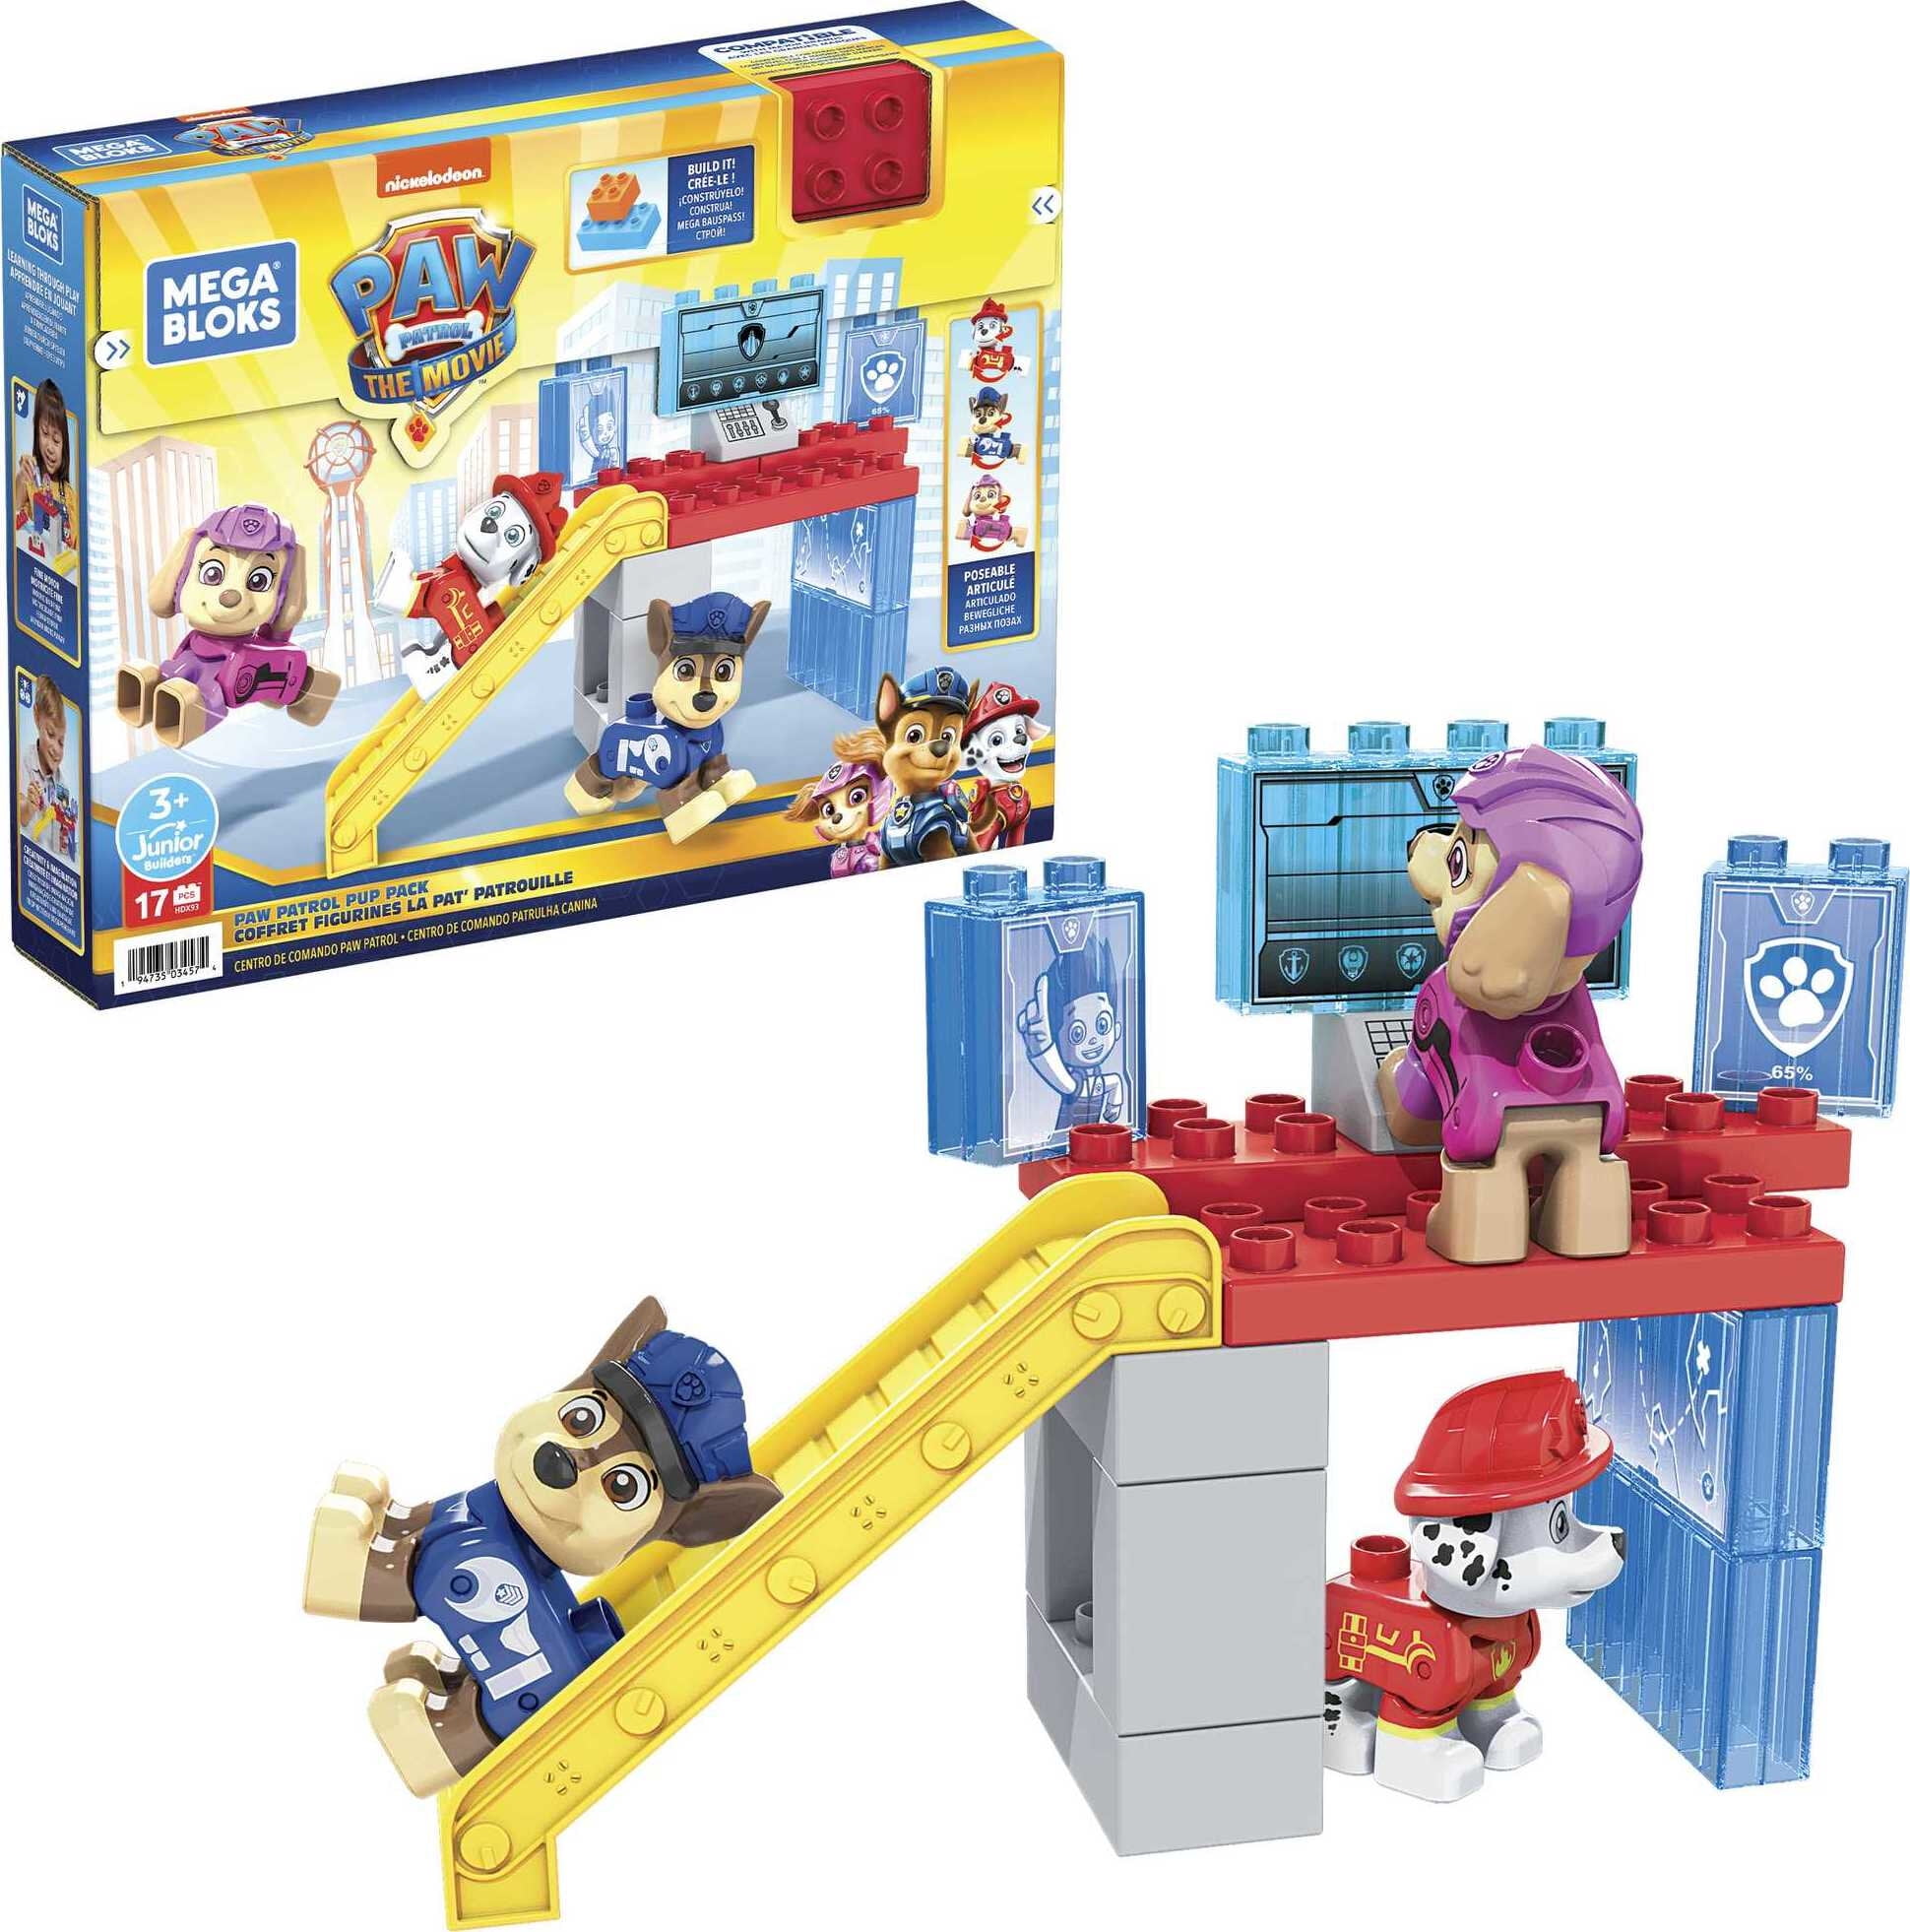 Free Shipping Mega Bloks Figures & Sets Buy 1 Get 1 25% OFF Add 2 to Cart 